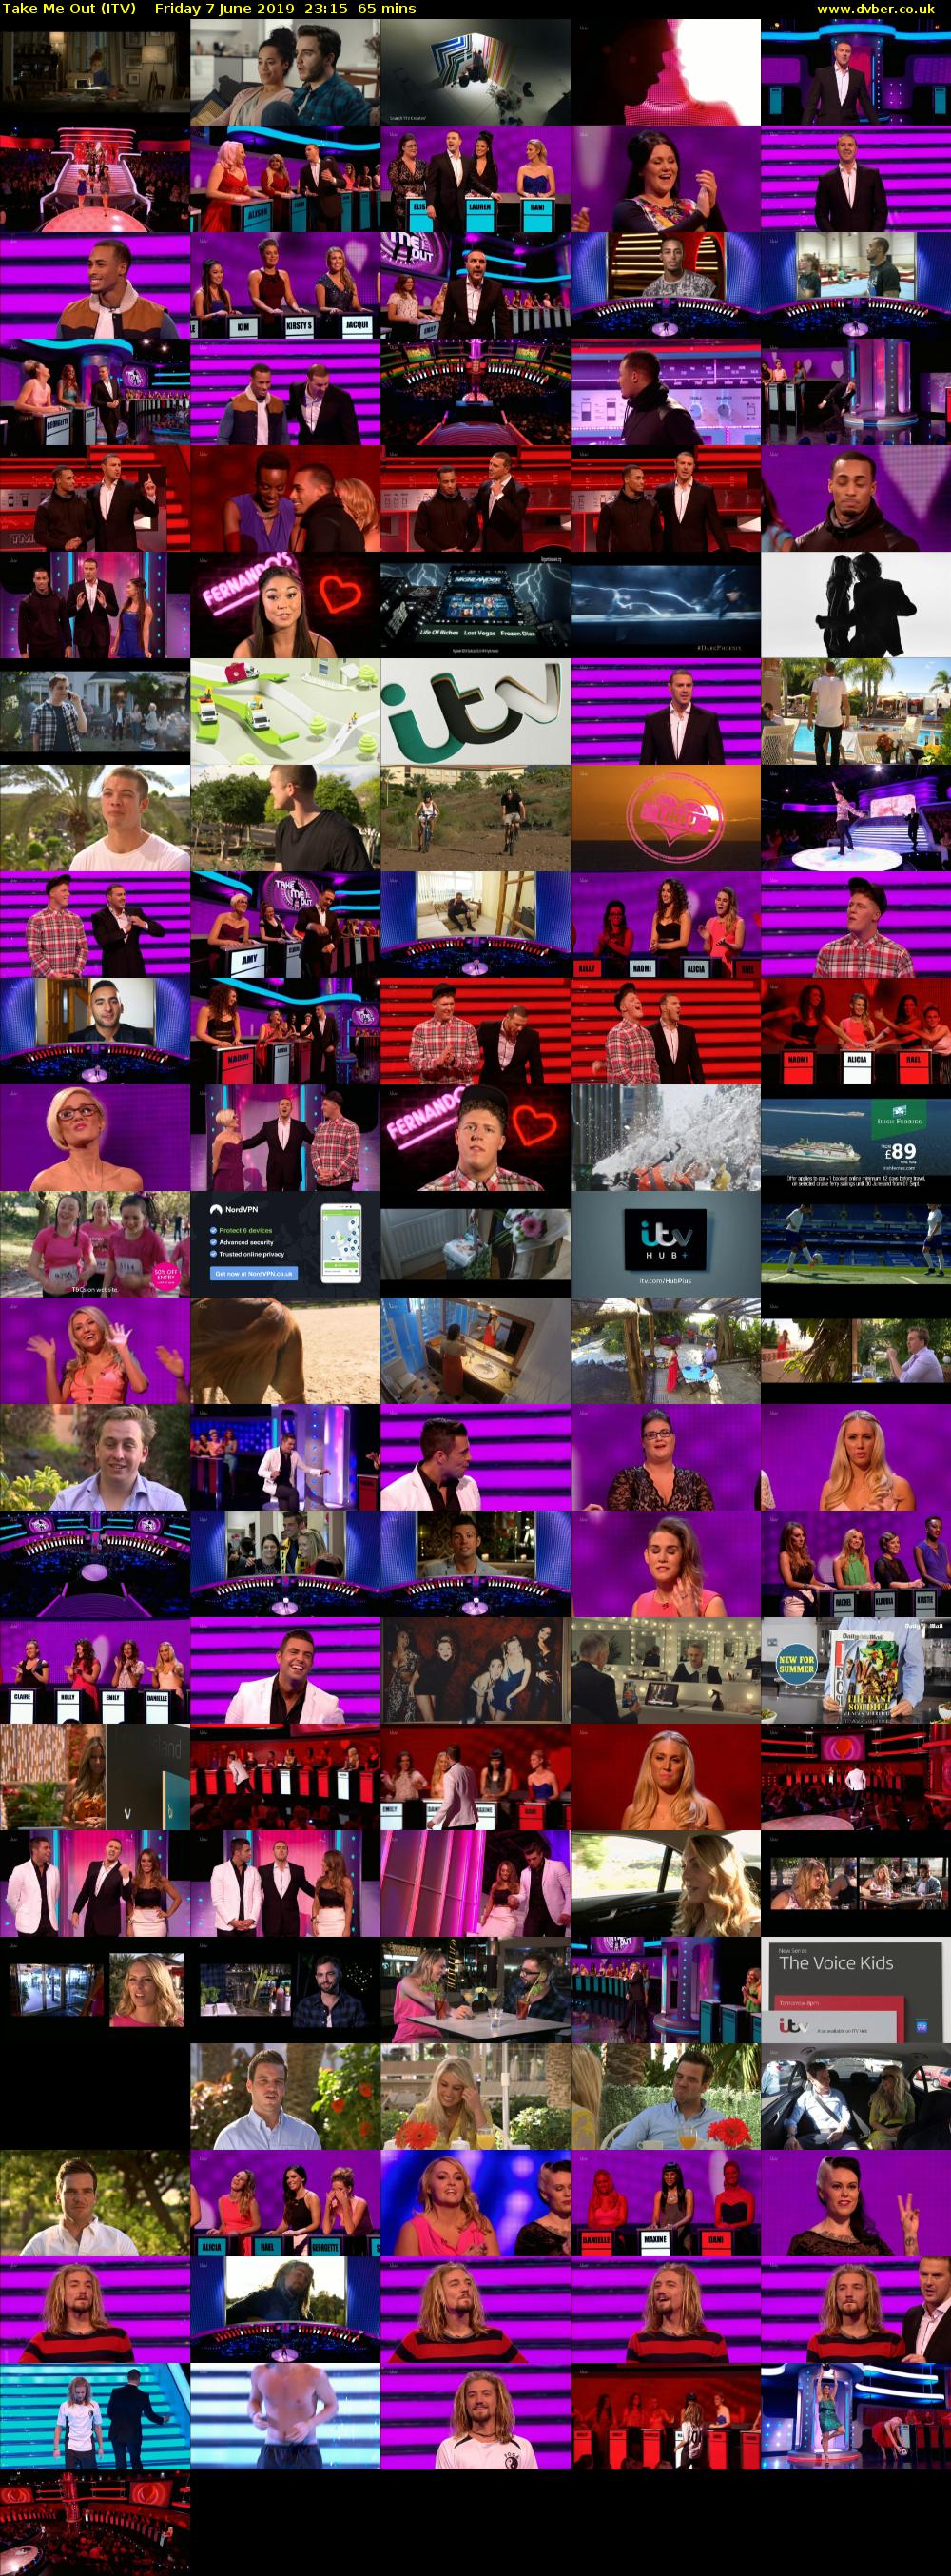 Take Me Out (ITV) Friday 7 June 2019 23:15 - 00:20